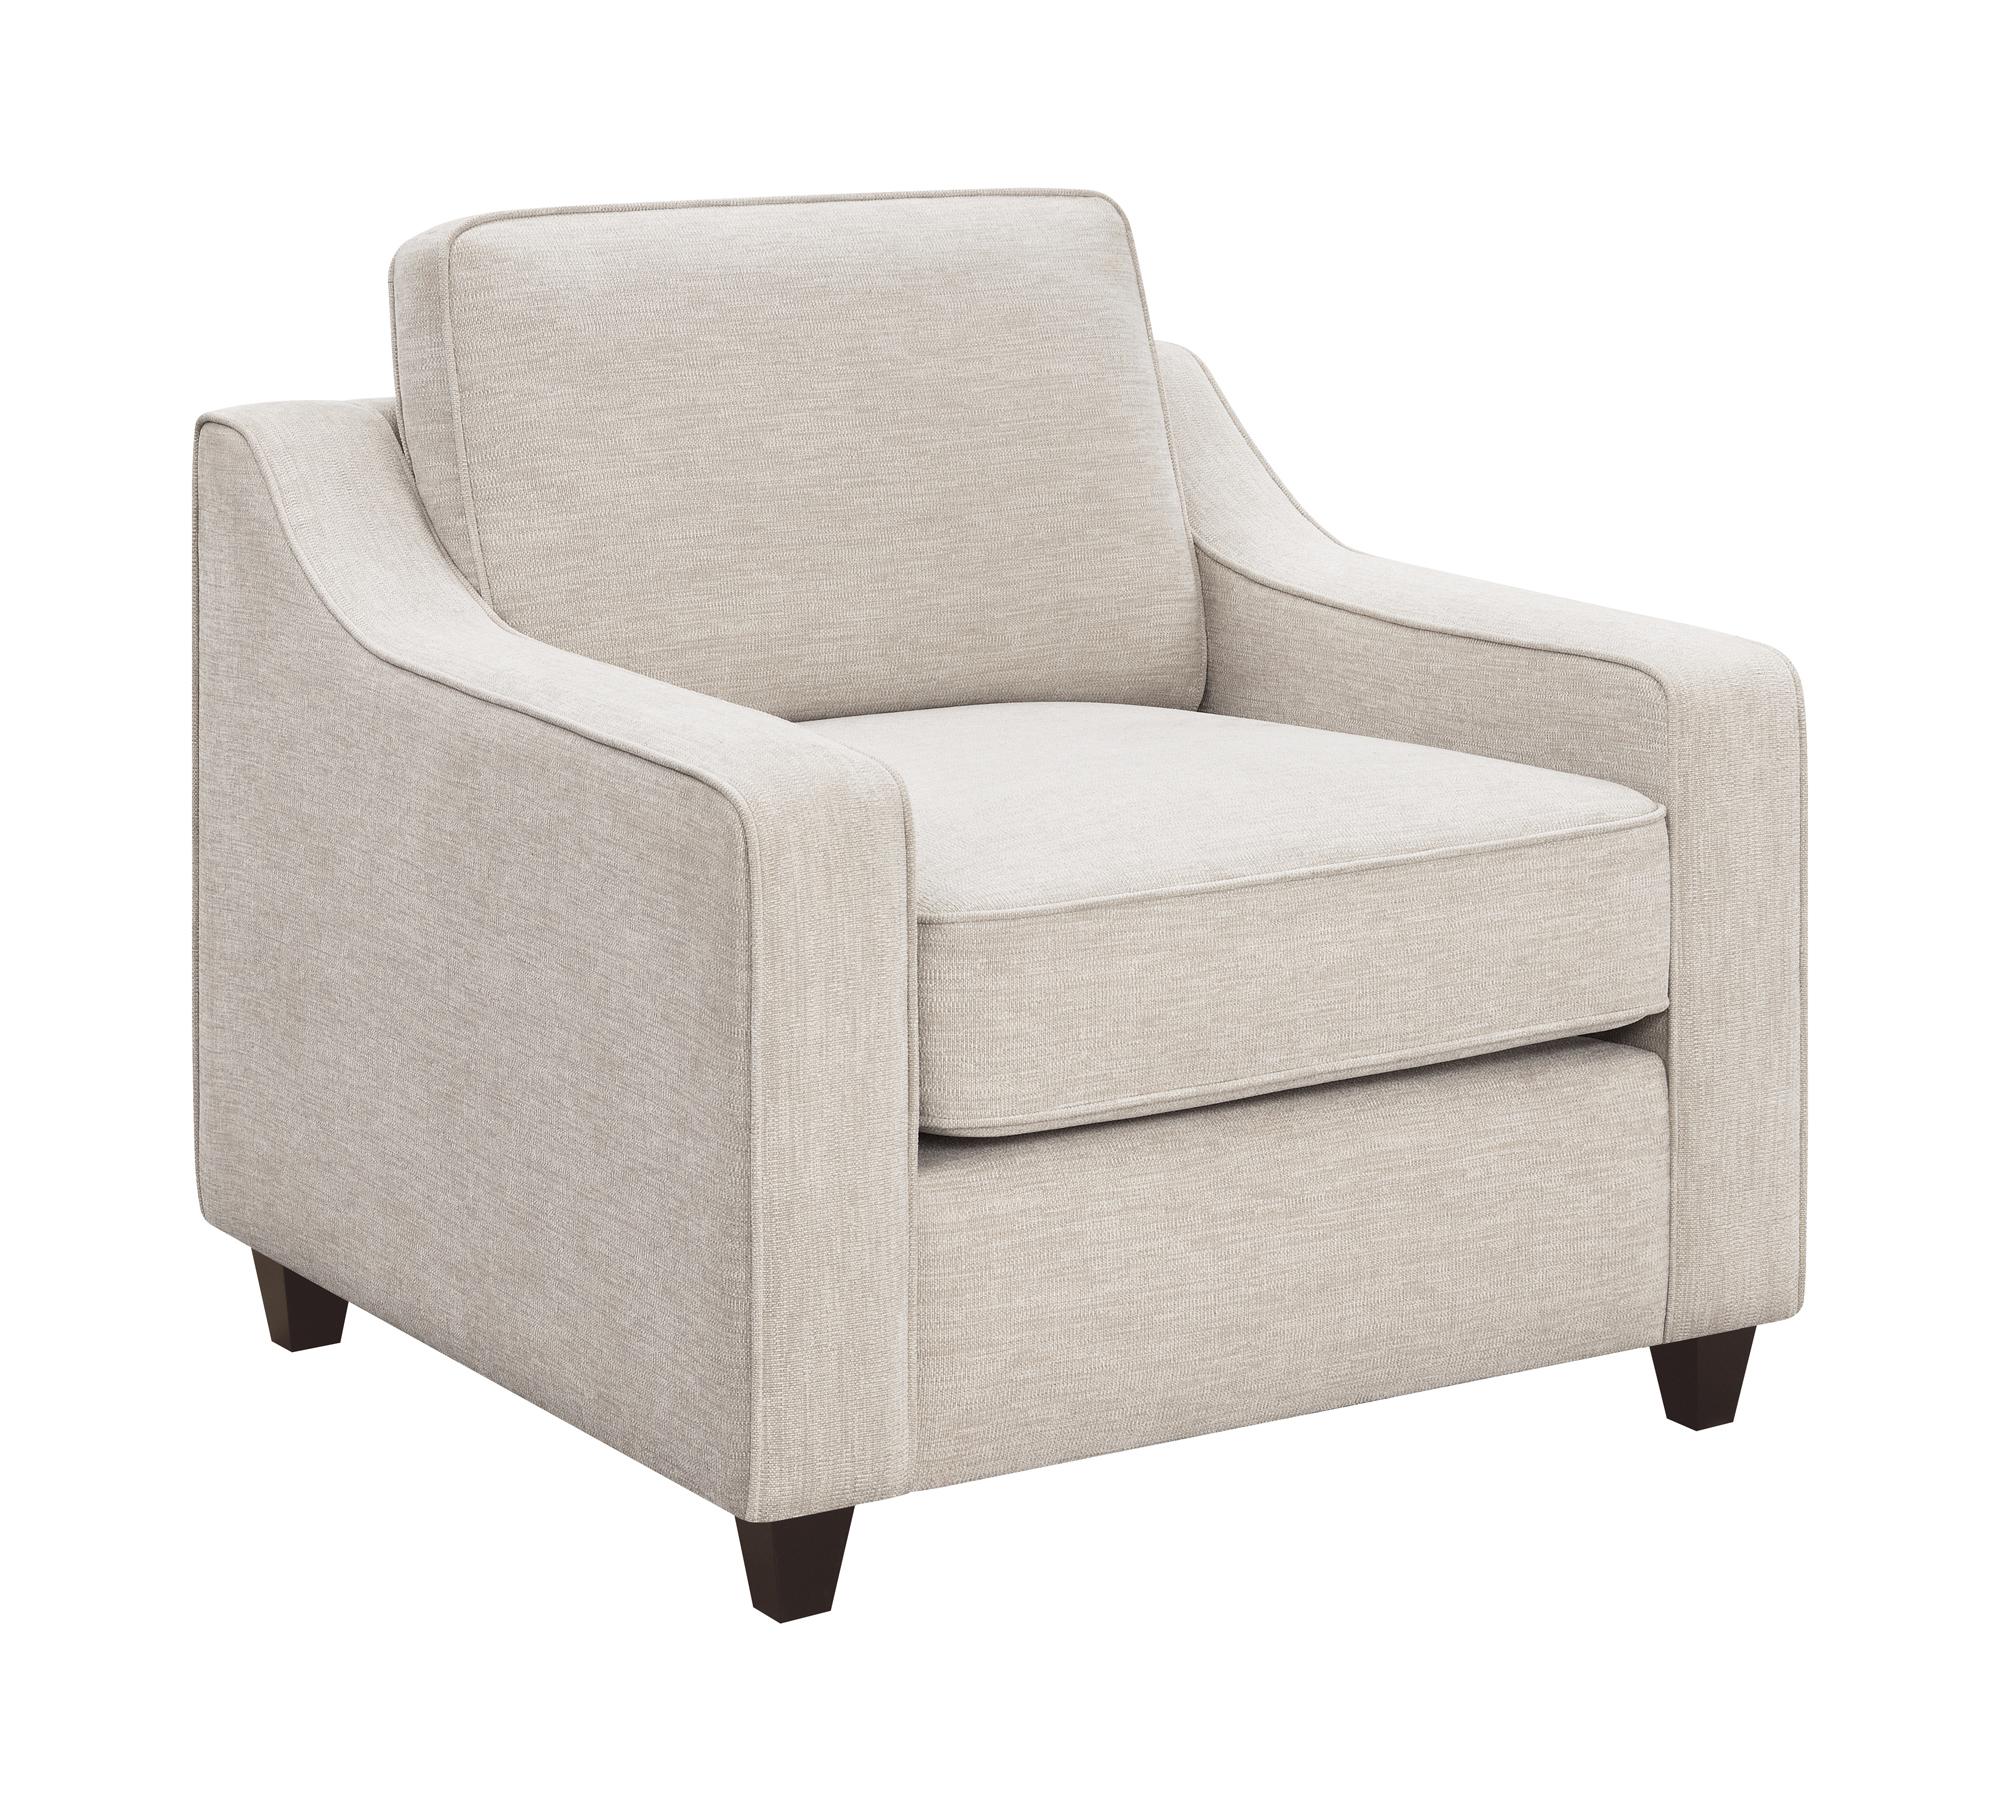 

    
Transitional Beige Woven Chenille Arm Chair Coaster 552063 Christine
